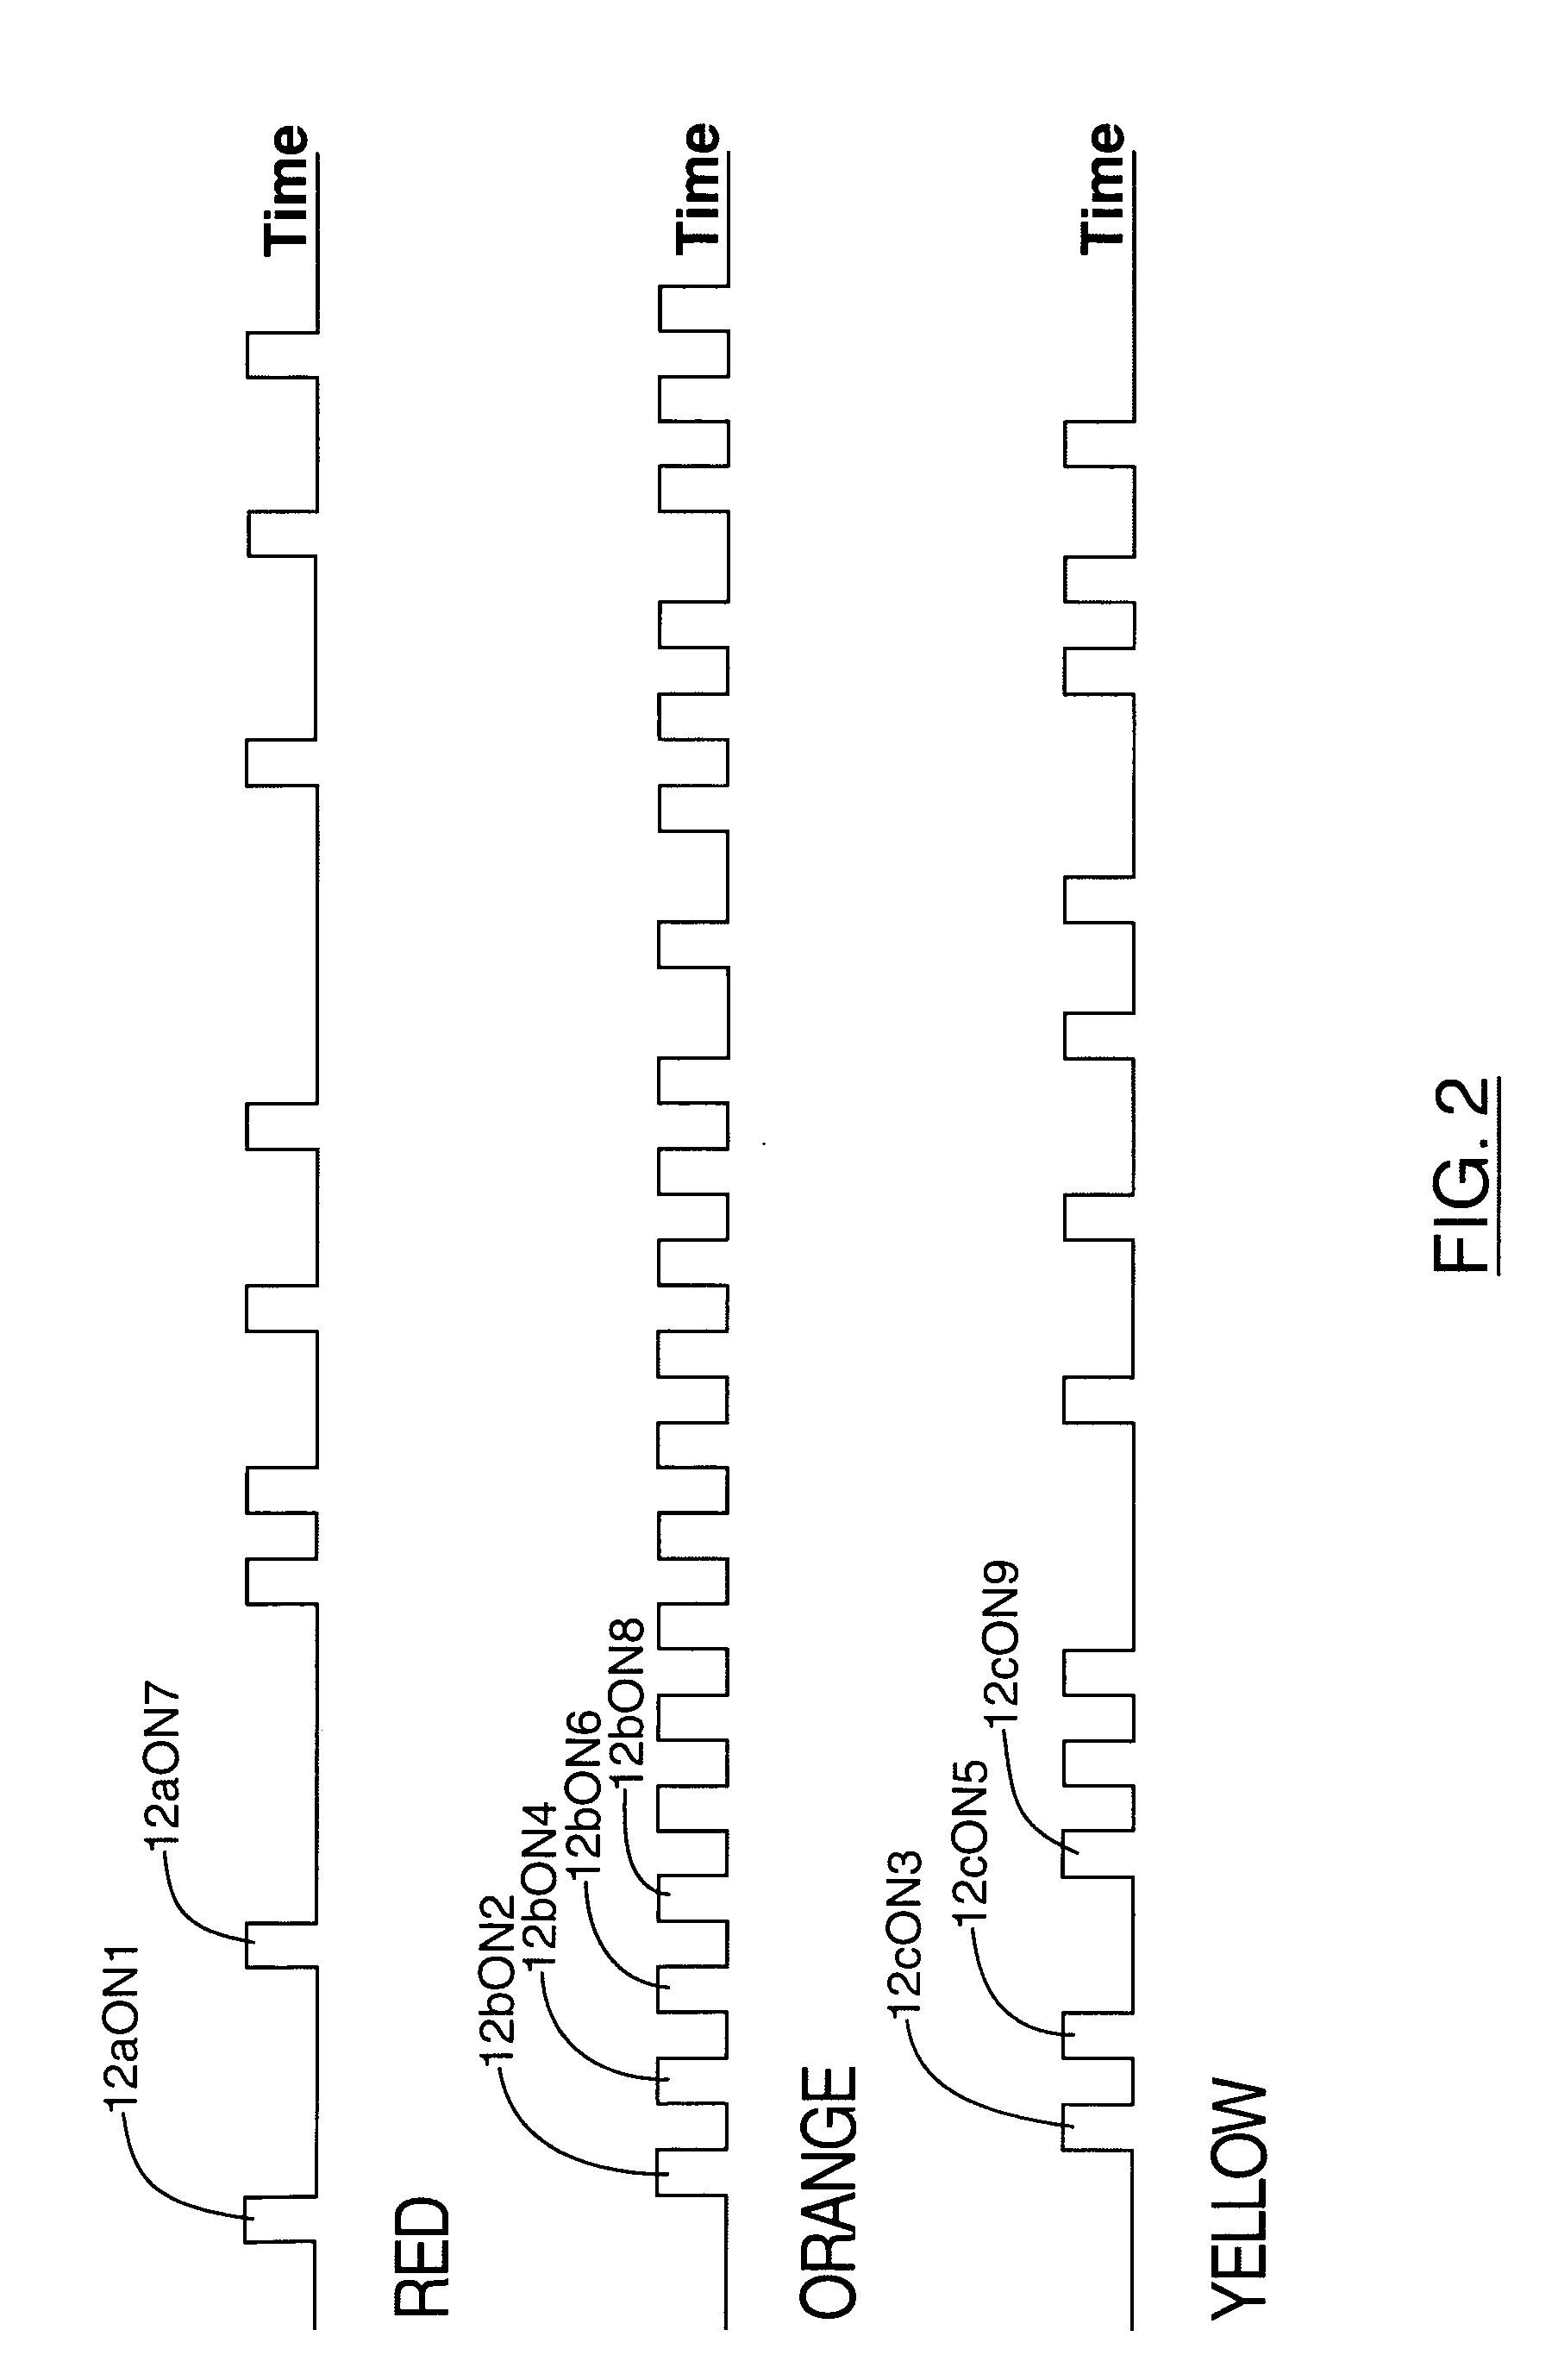 Flame simulating device